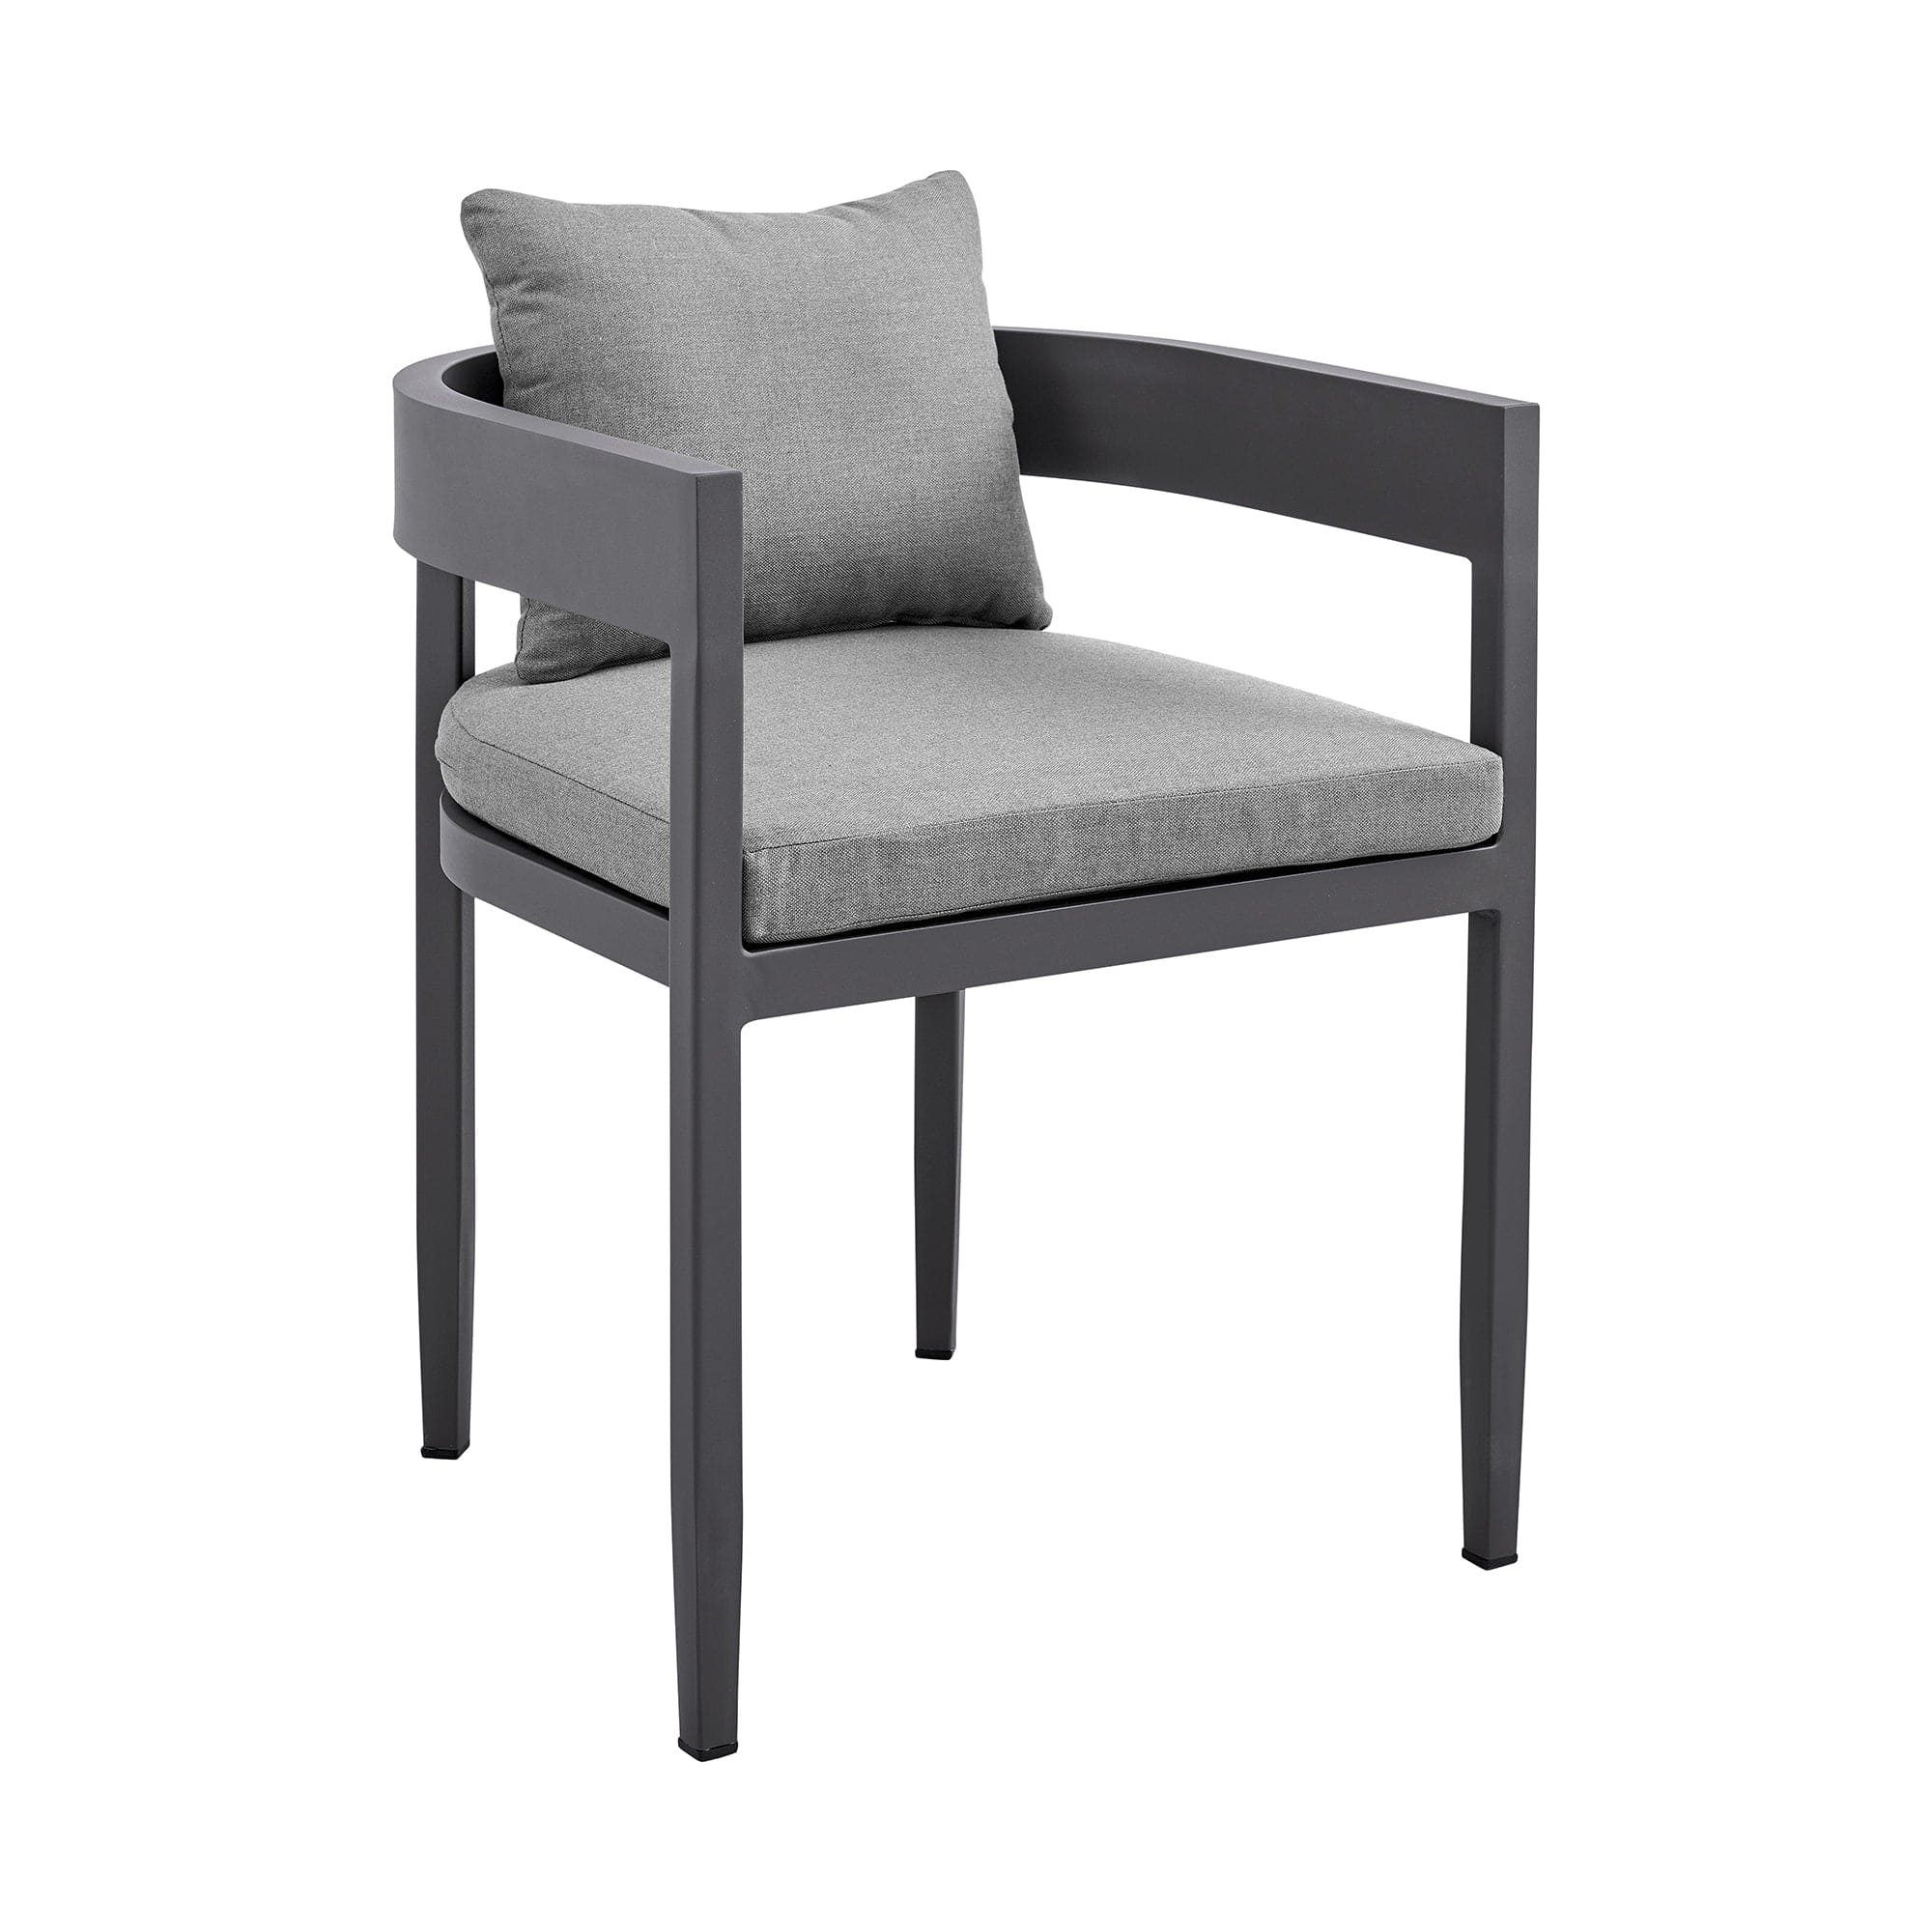 Armen Living Outdoor Dining Chair Armen Living | Menorca Outdoor Patio Dining Chairs in Aluminum with Grey Cushions - Set of 2 | LCMQCHGR